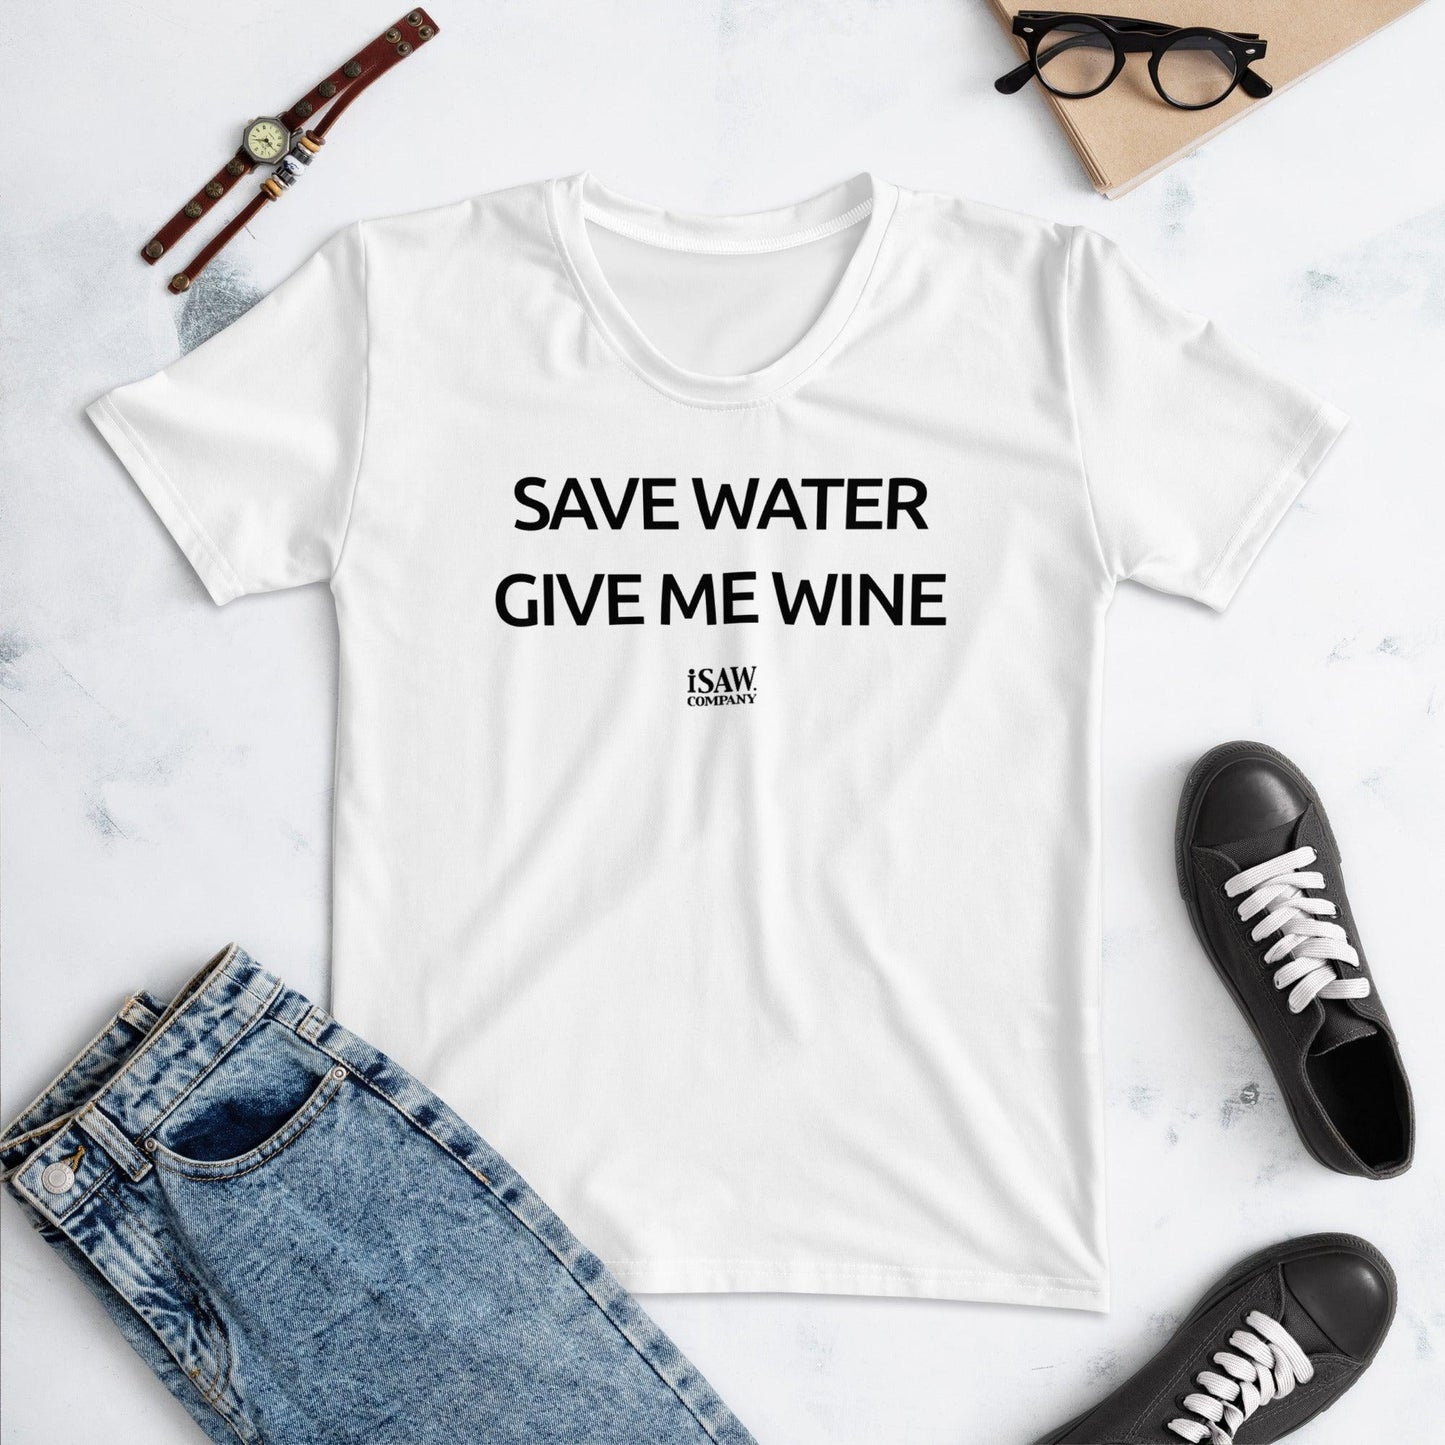 Save Water Give Me Wine - Womens White T-Shirt - iSAW Company